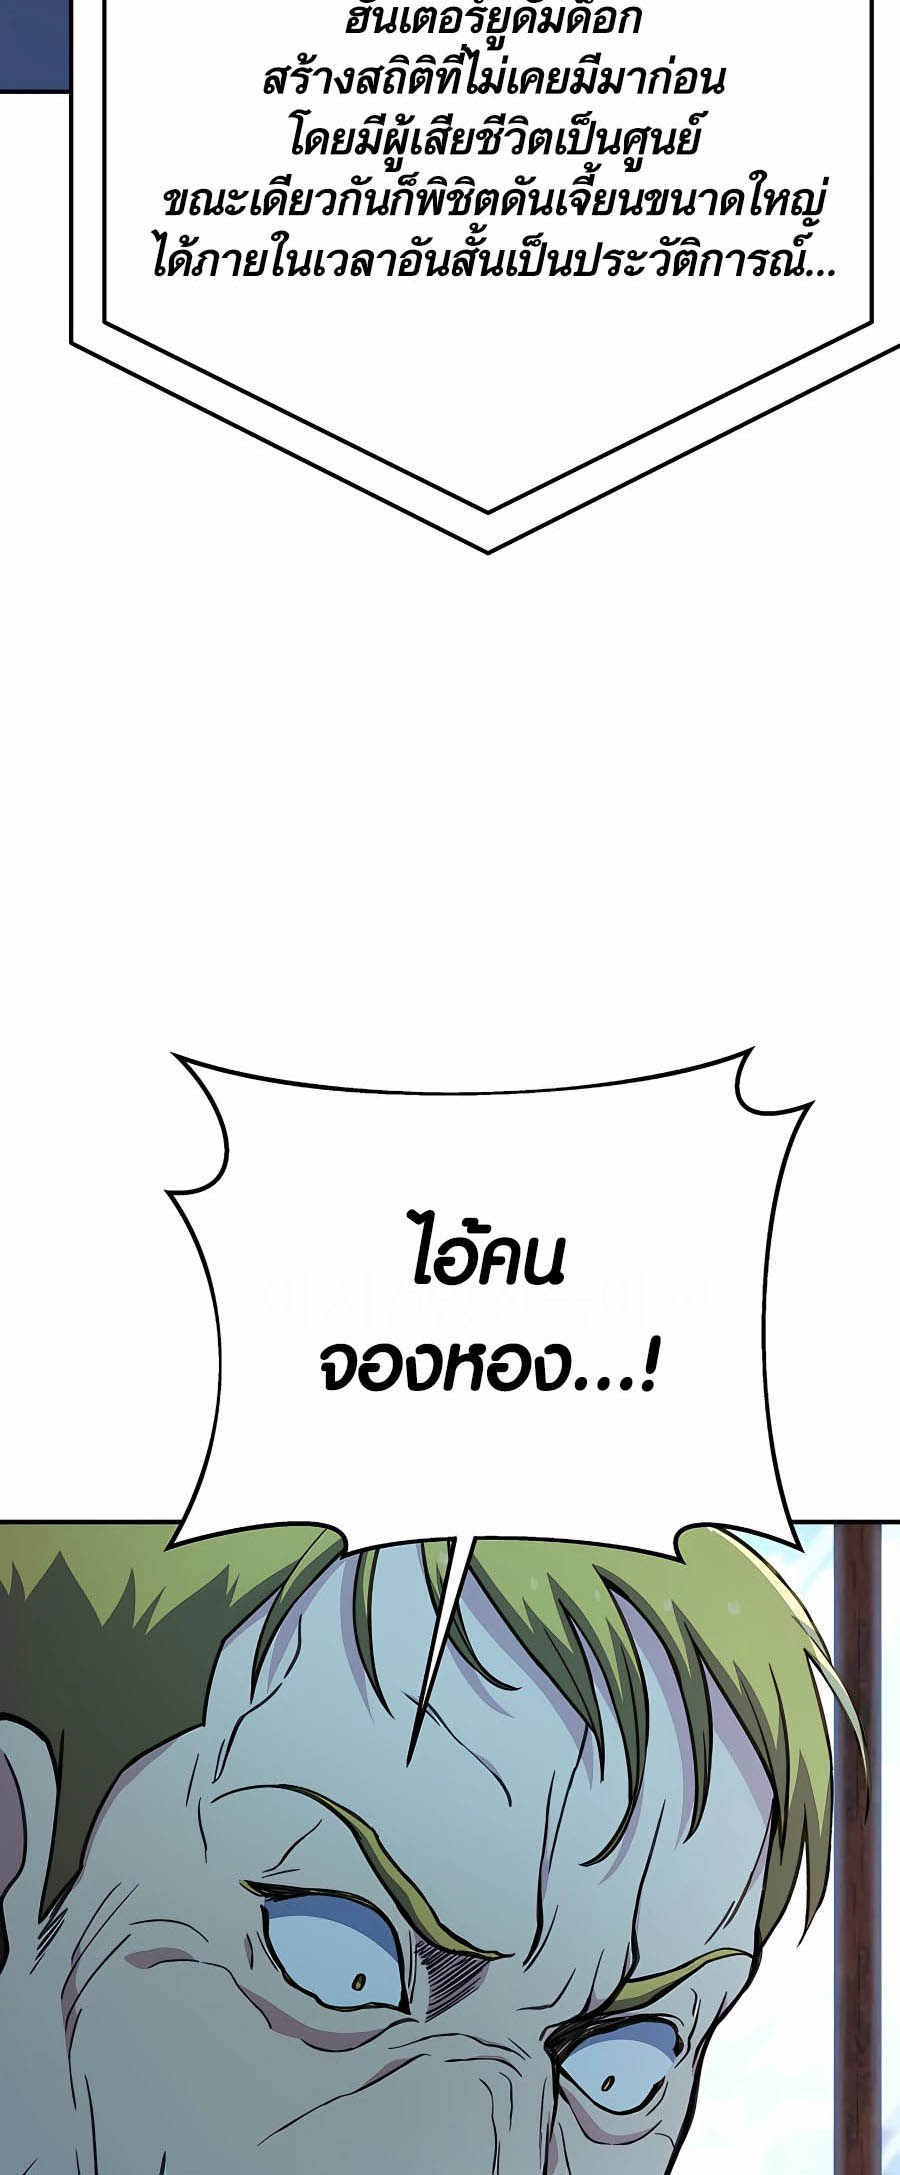 à¸­à¹ˆà¸²à¸™à¸¡à¸±à¸™à¸®à¸§à¸² à¹€à¸£à¸·à¹ˆà¸­à¸‡ The Part Time Land of the Gods 56 56